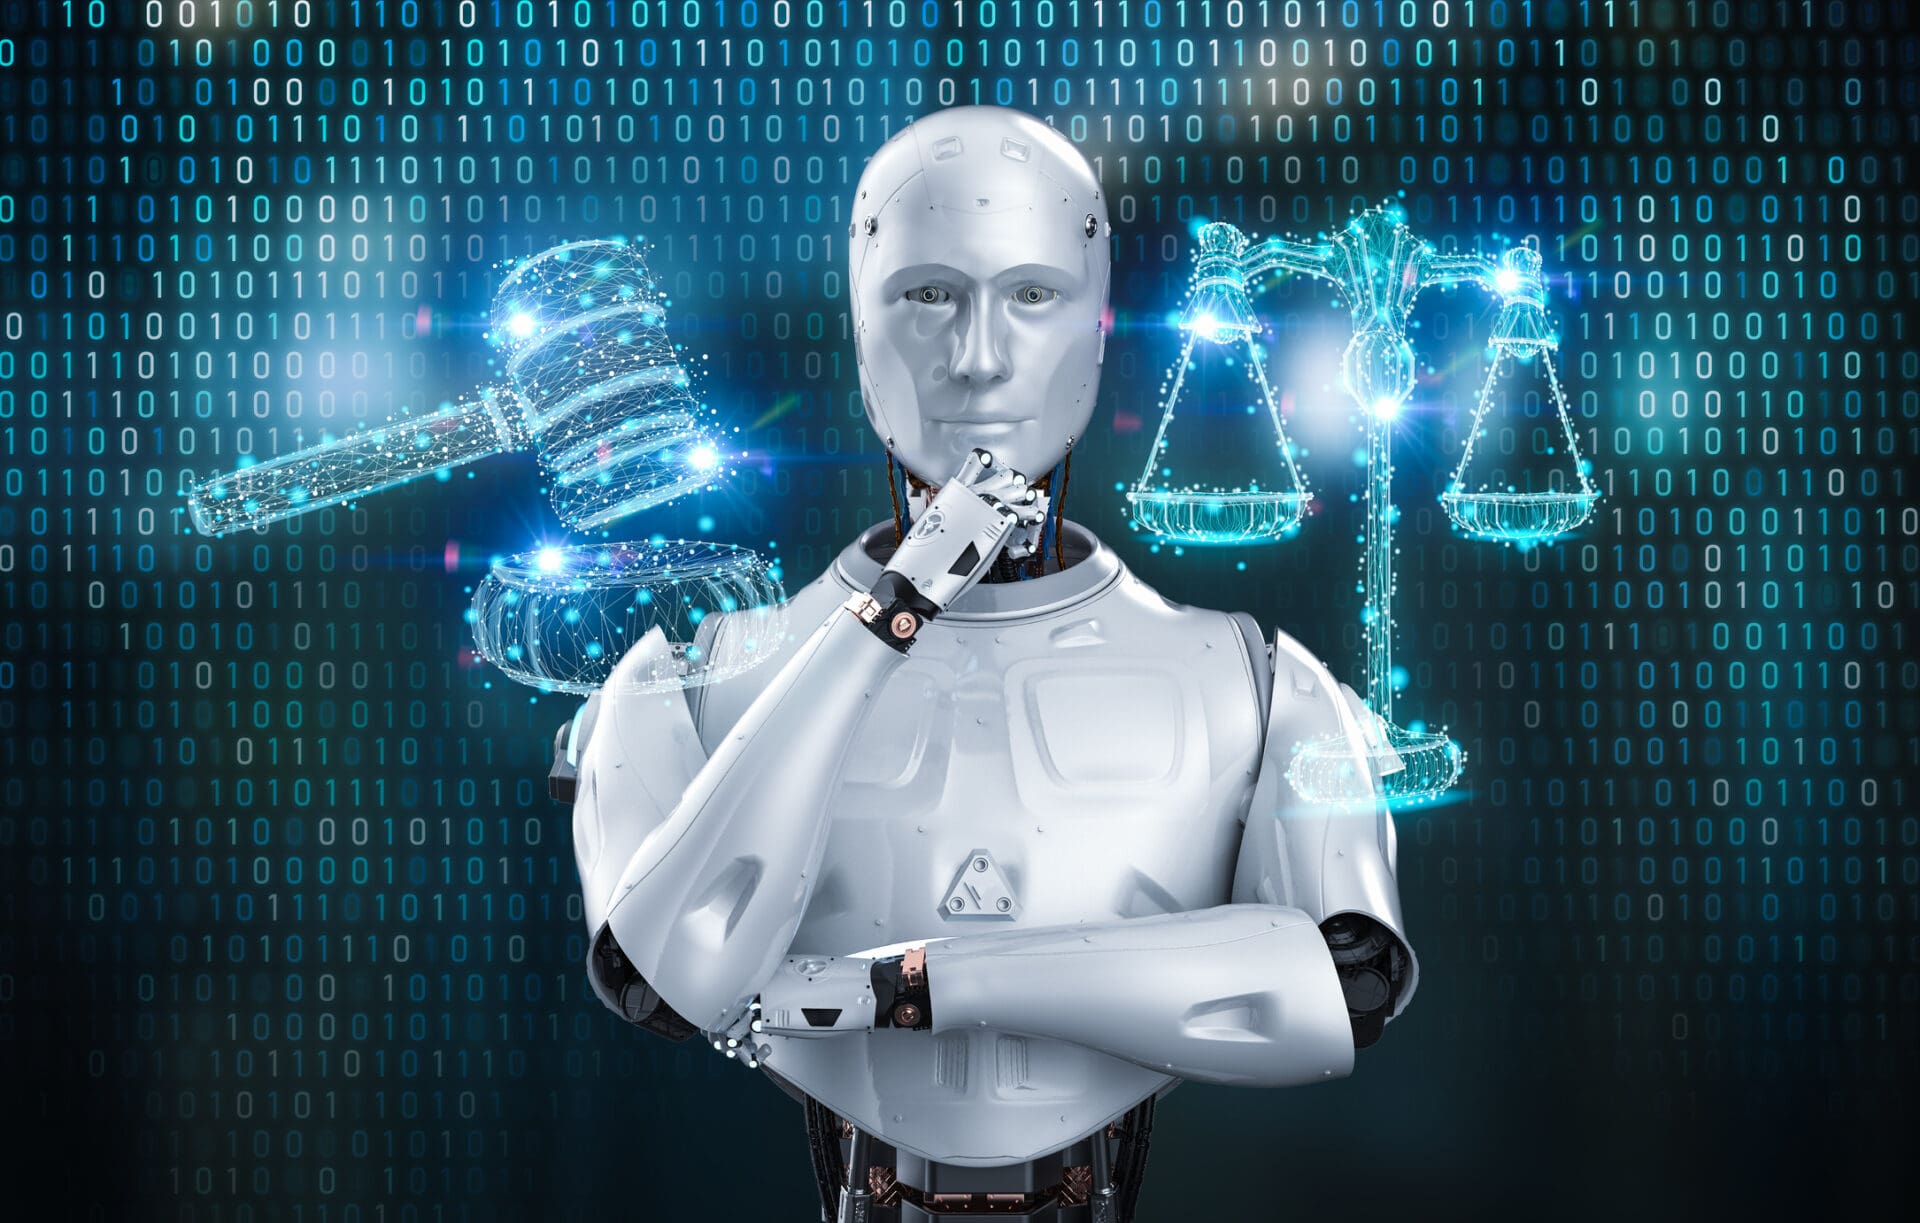 AI Act and related legal framework